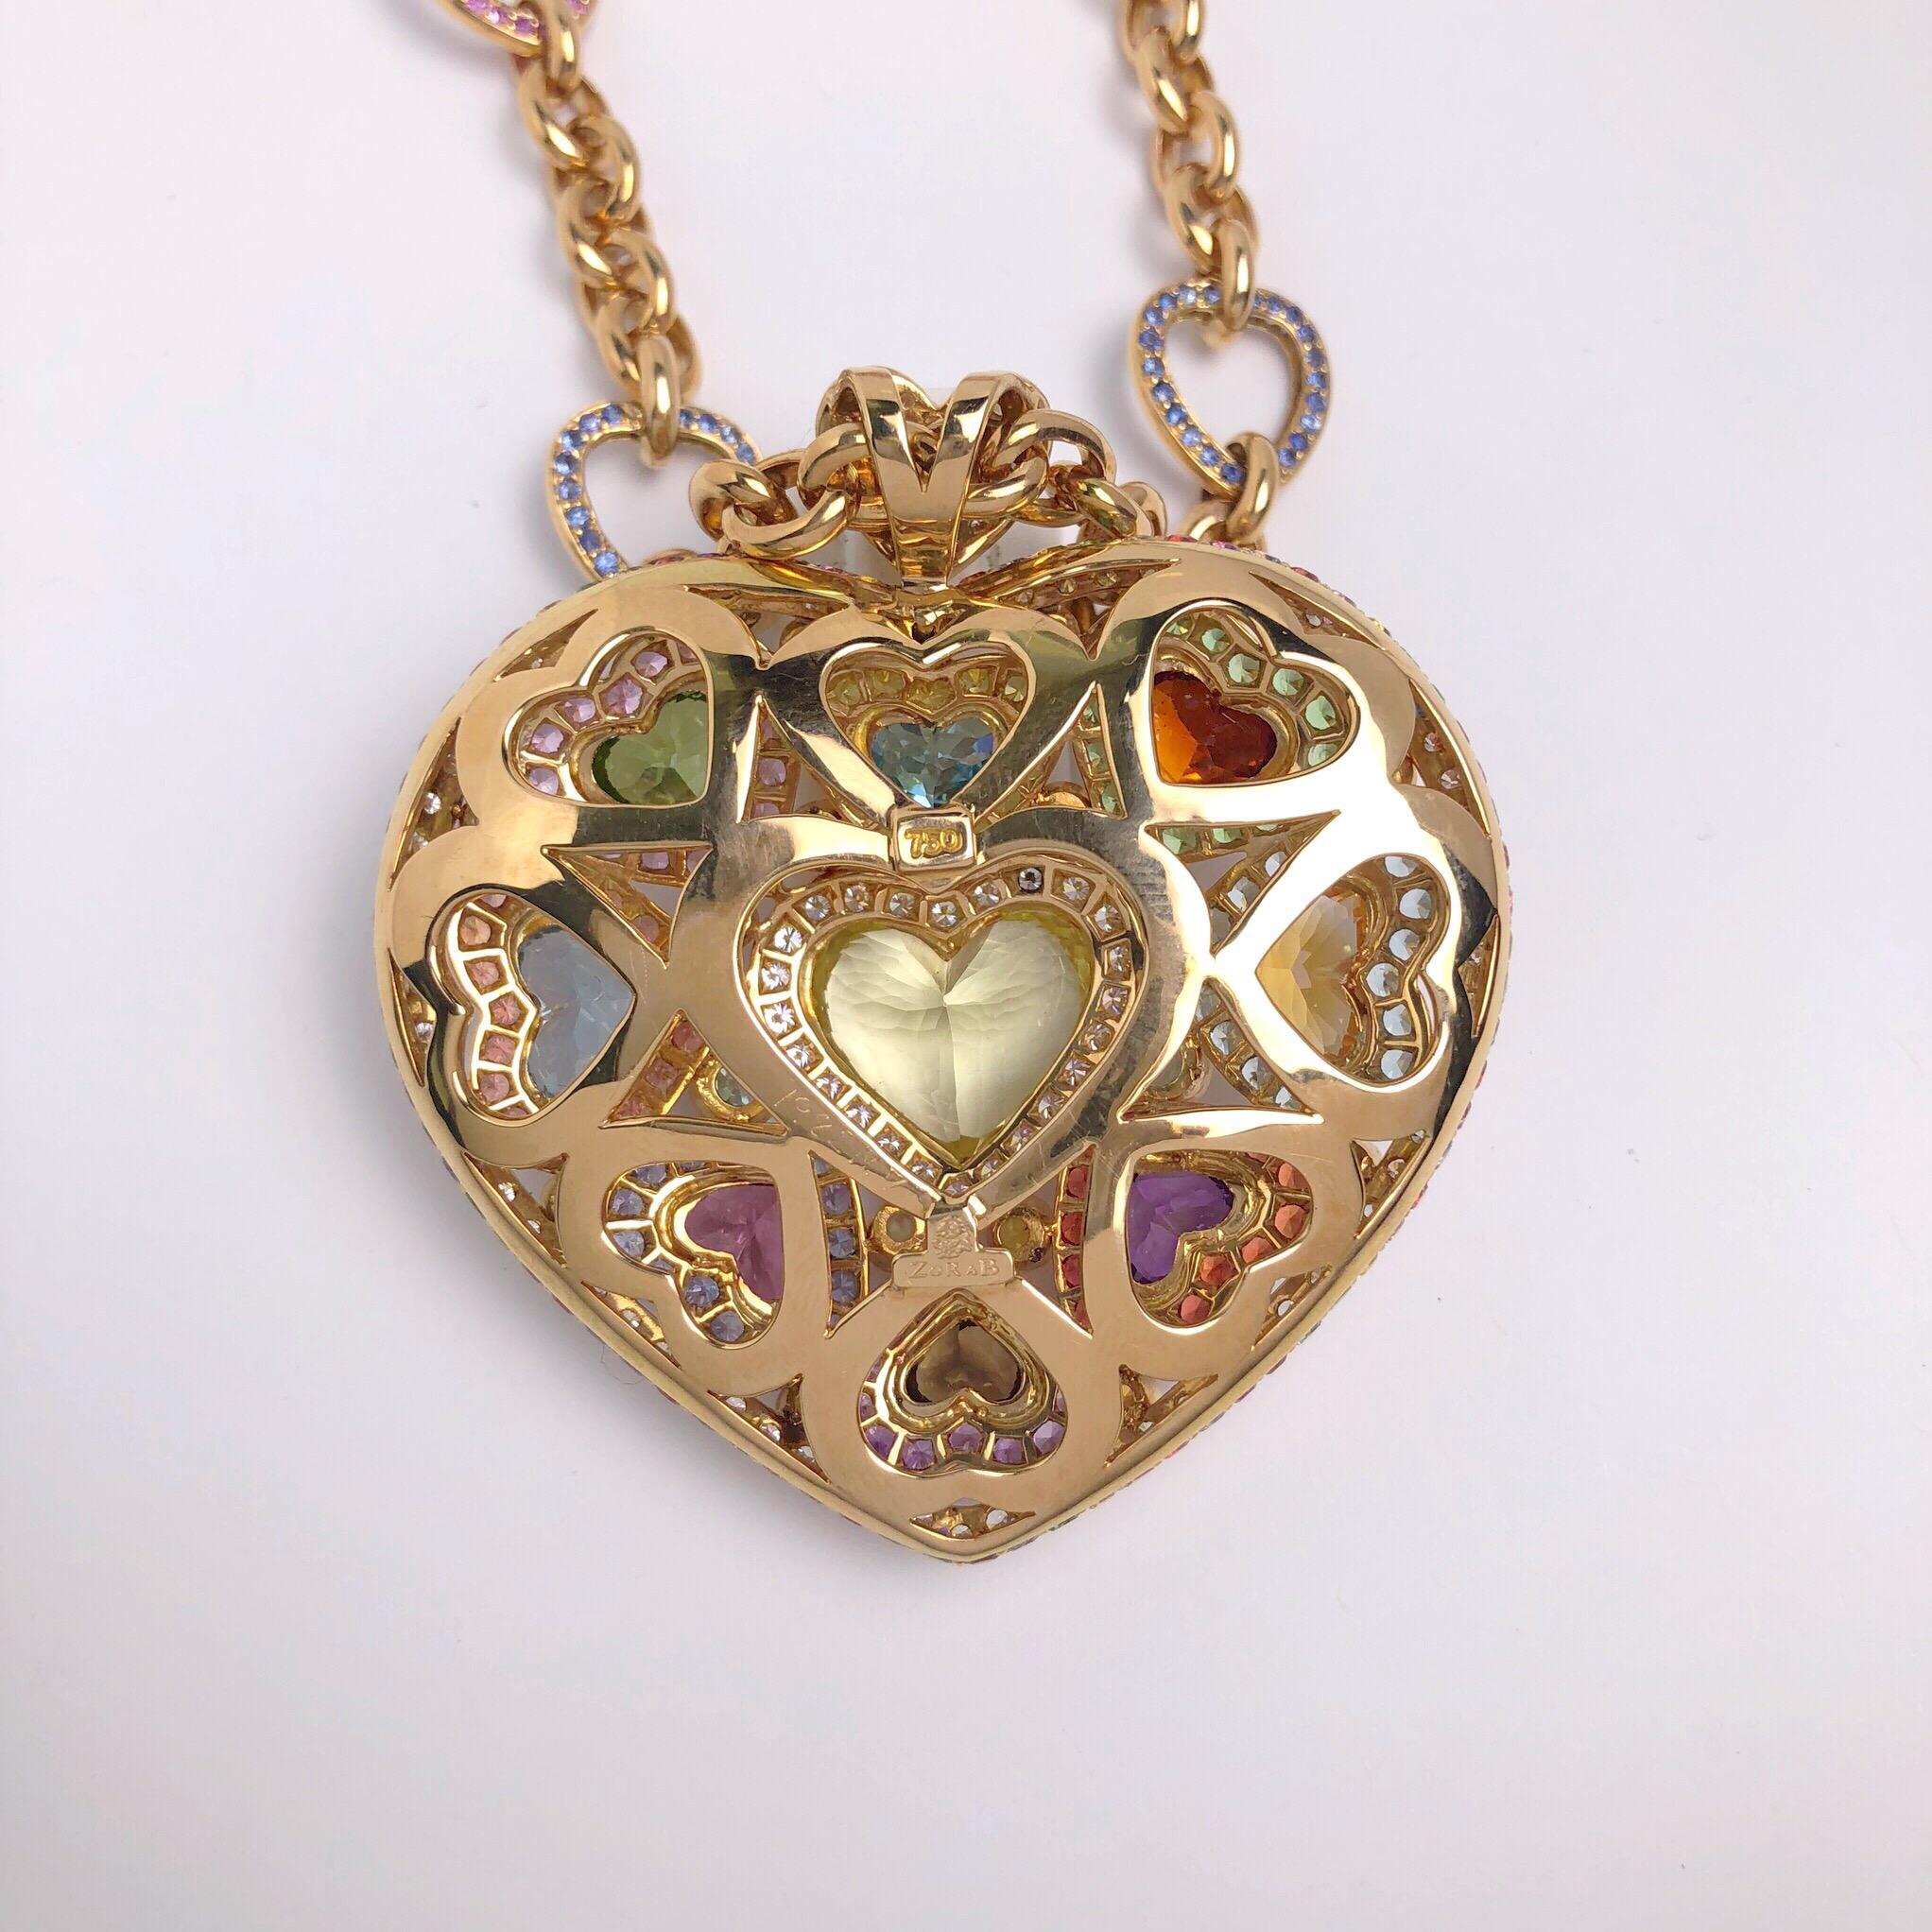 Round Cut 18 Karat Gold and Semiprecious Heart Necklace with 15.94 Multicolored Sapphires